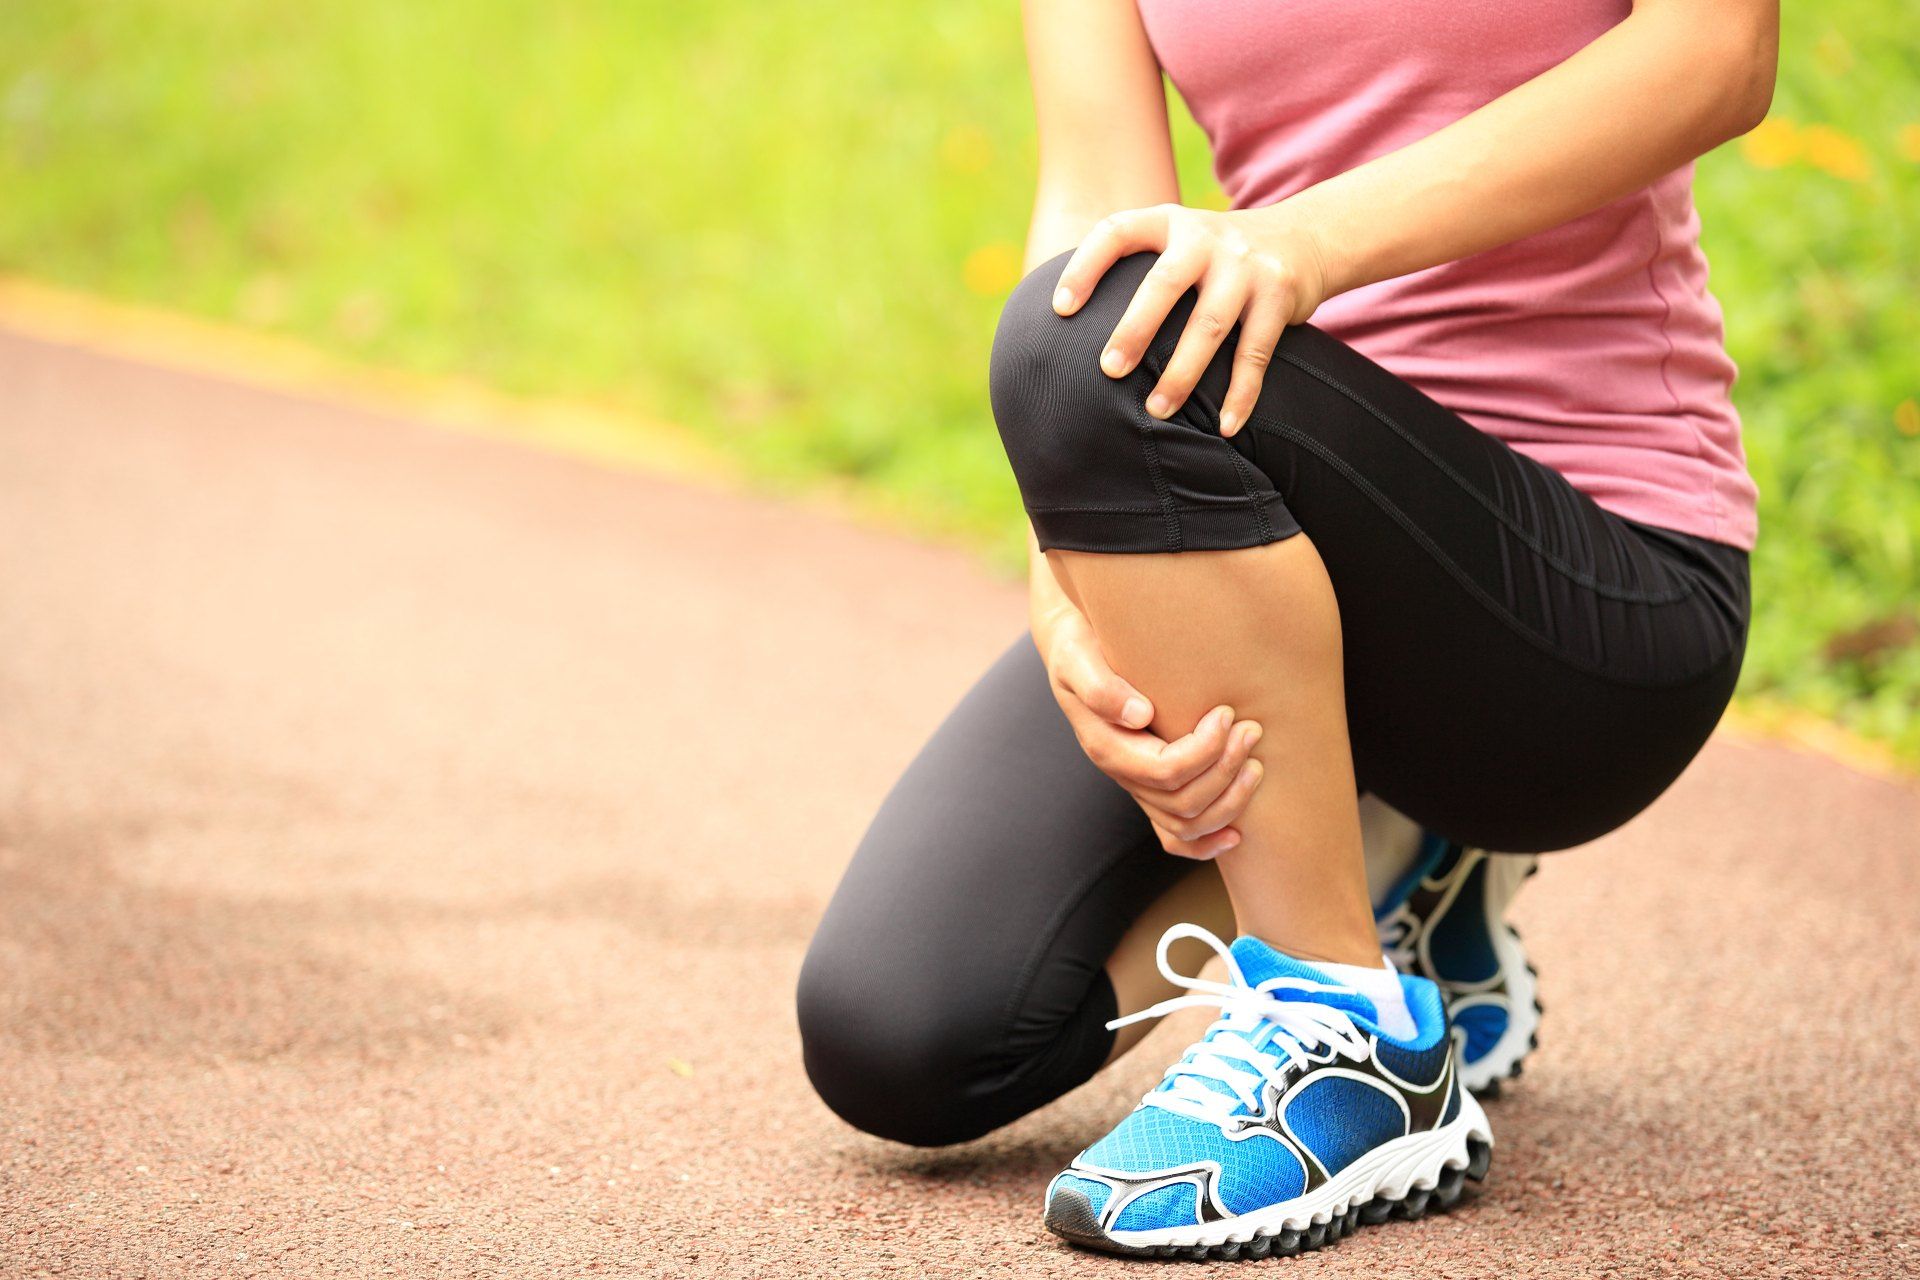 A female runner on a trail crouches down, grabbing her knee in pain